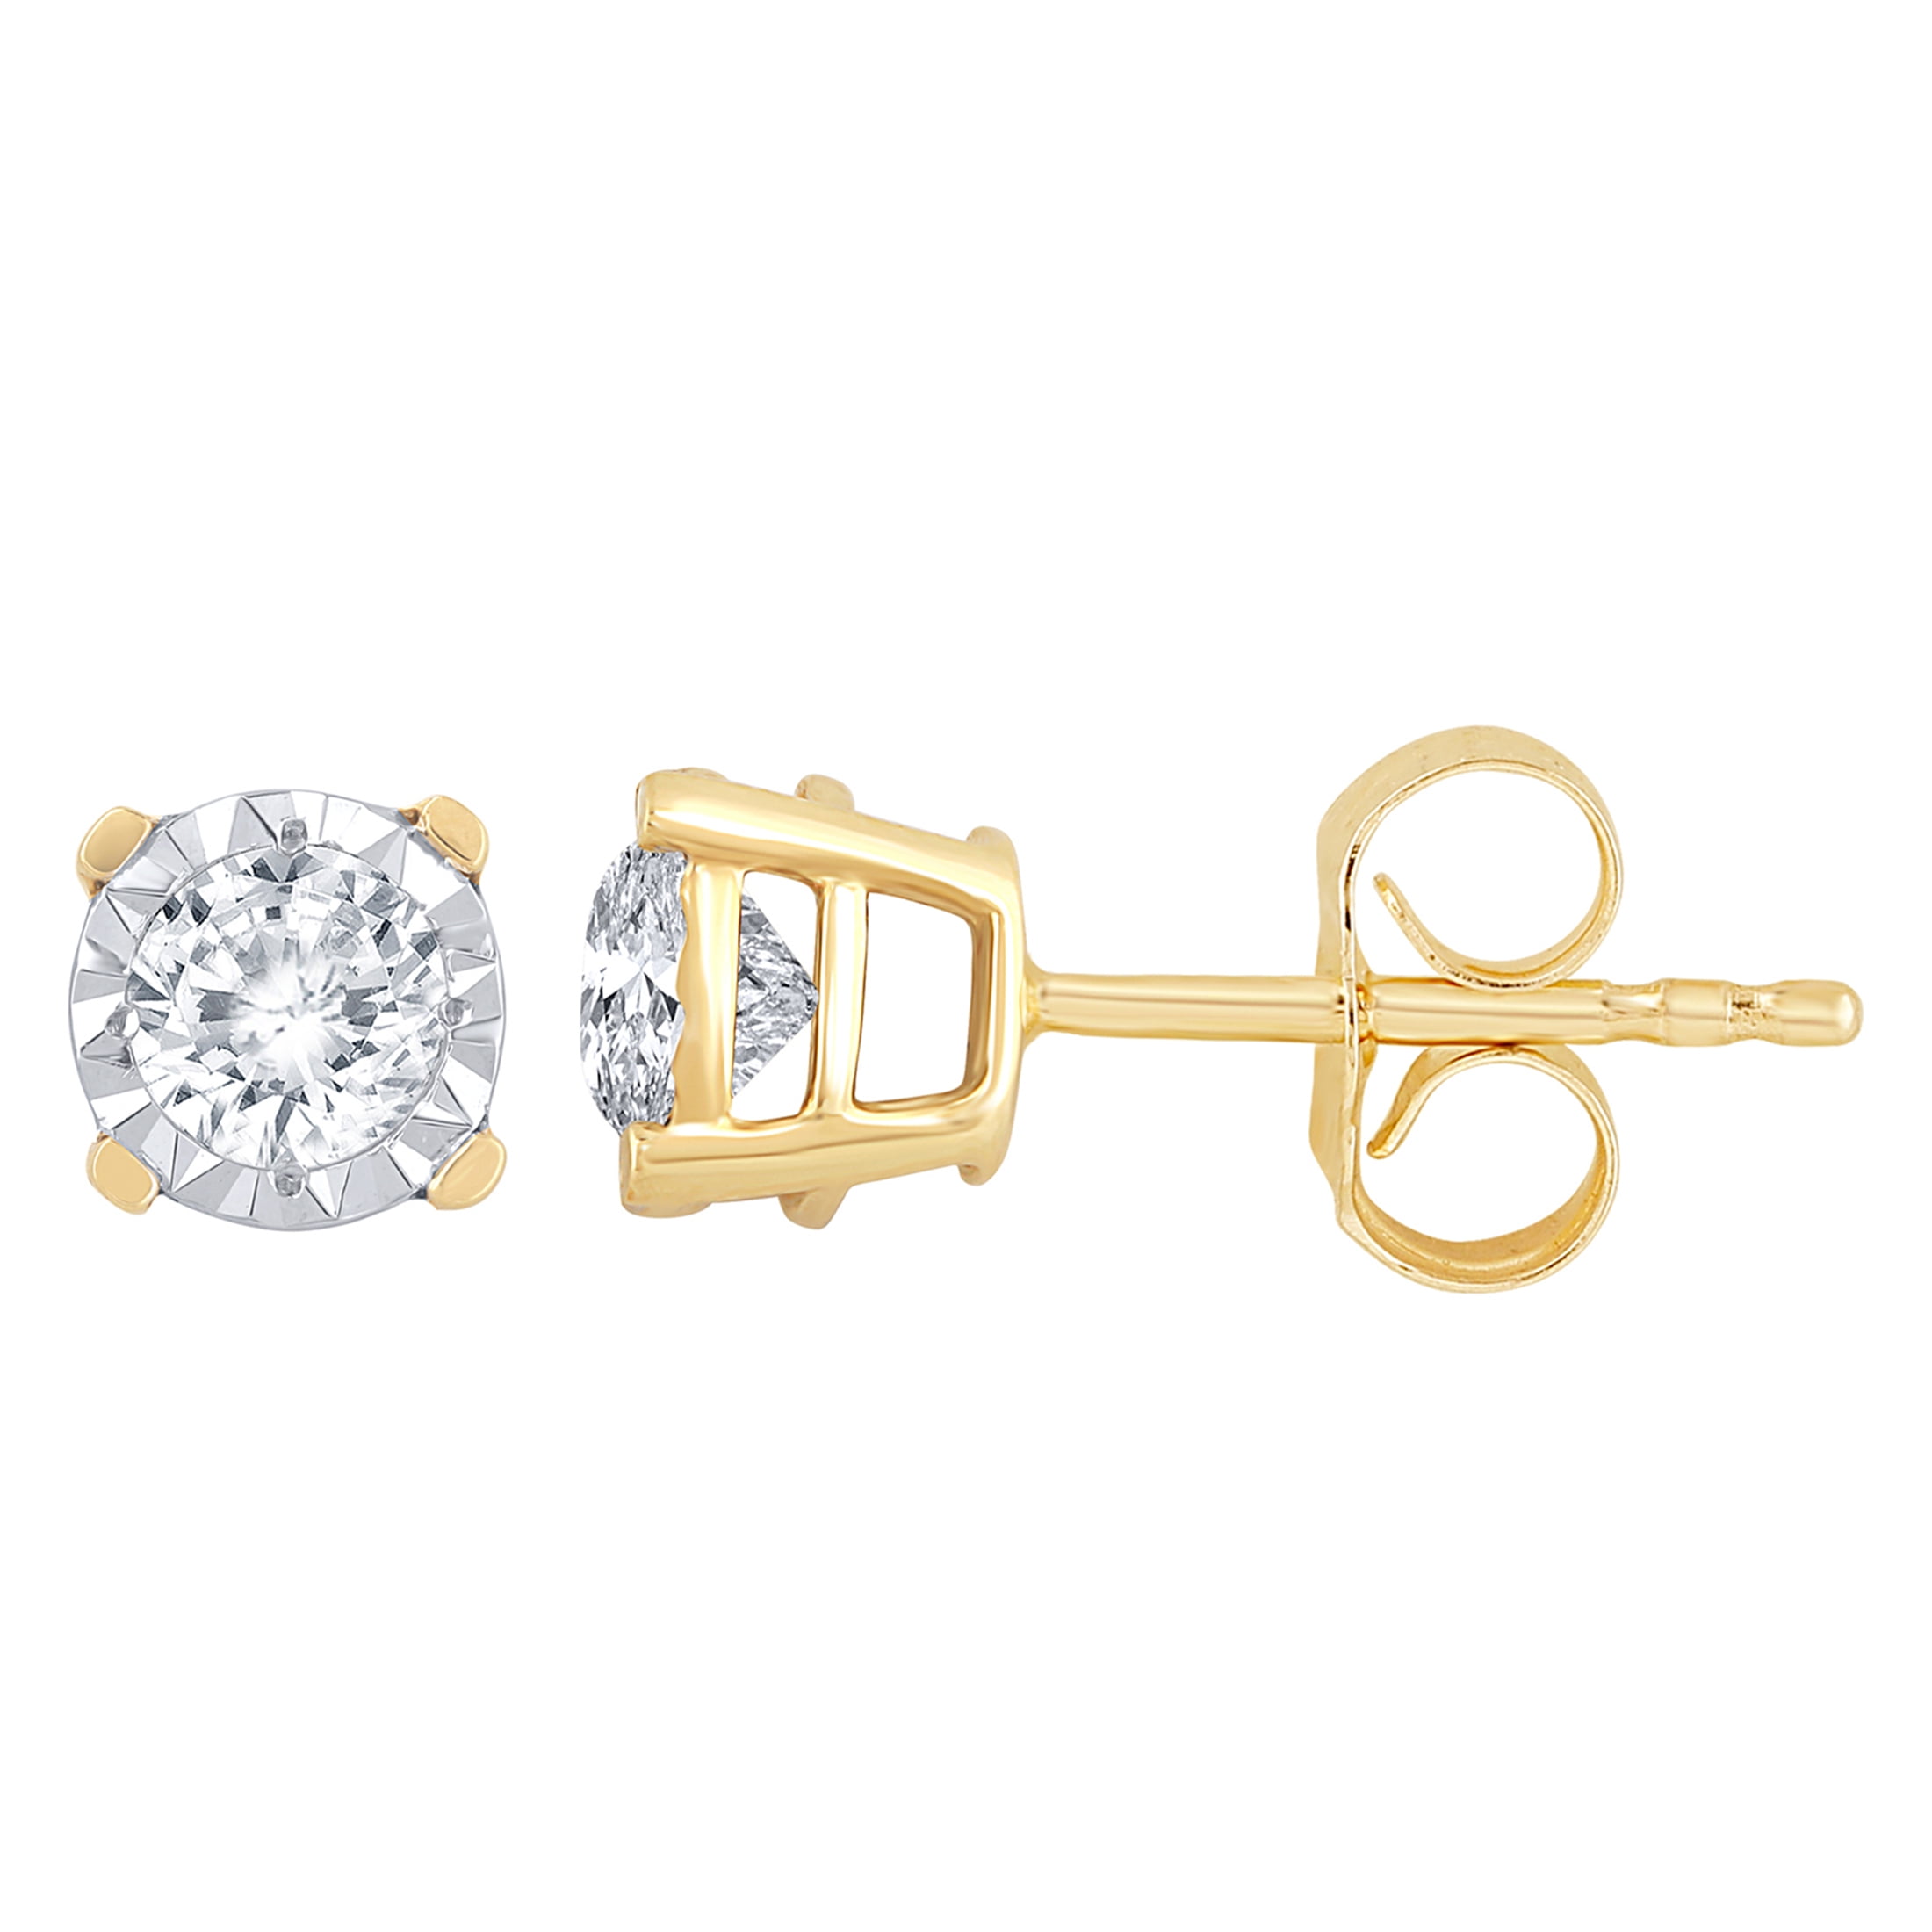 Solid 10k Yellow Gold 2.00 CT White Round Diamond Prong Set Stud Earrings